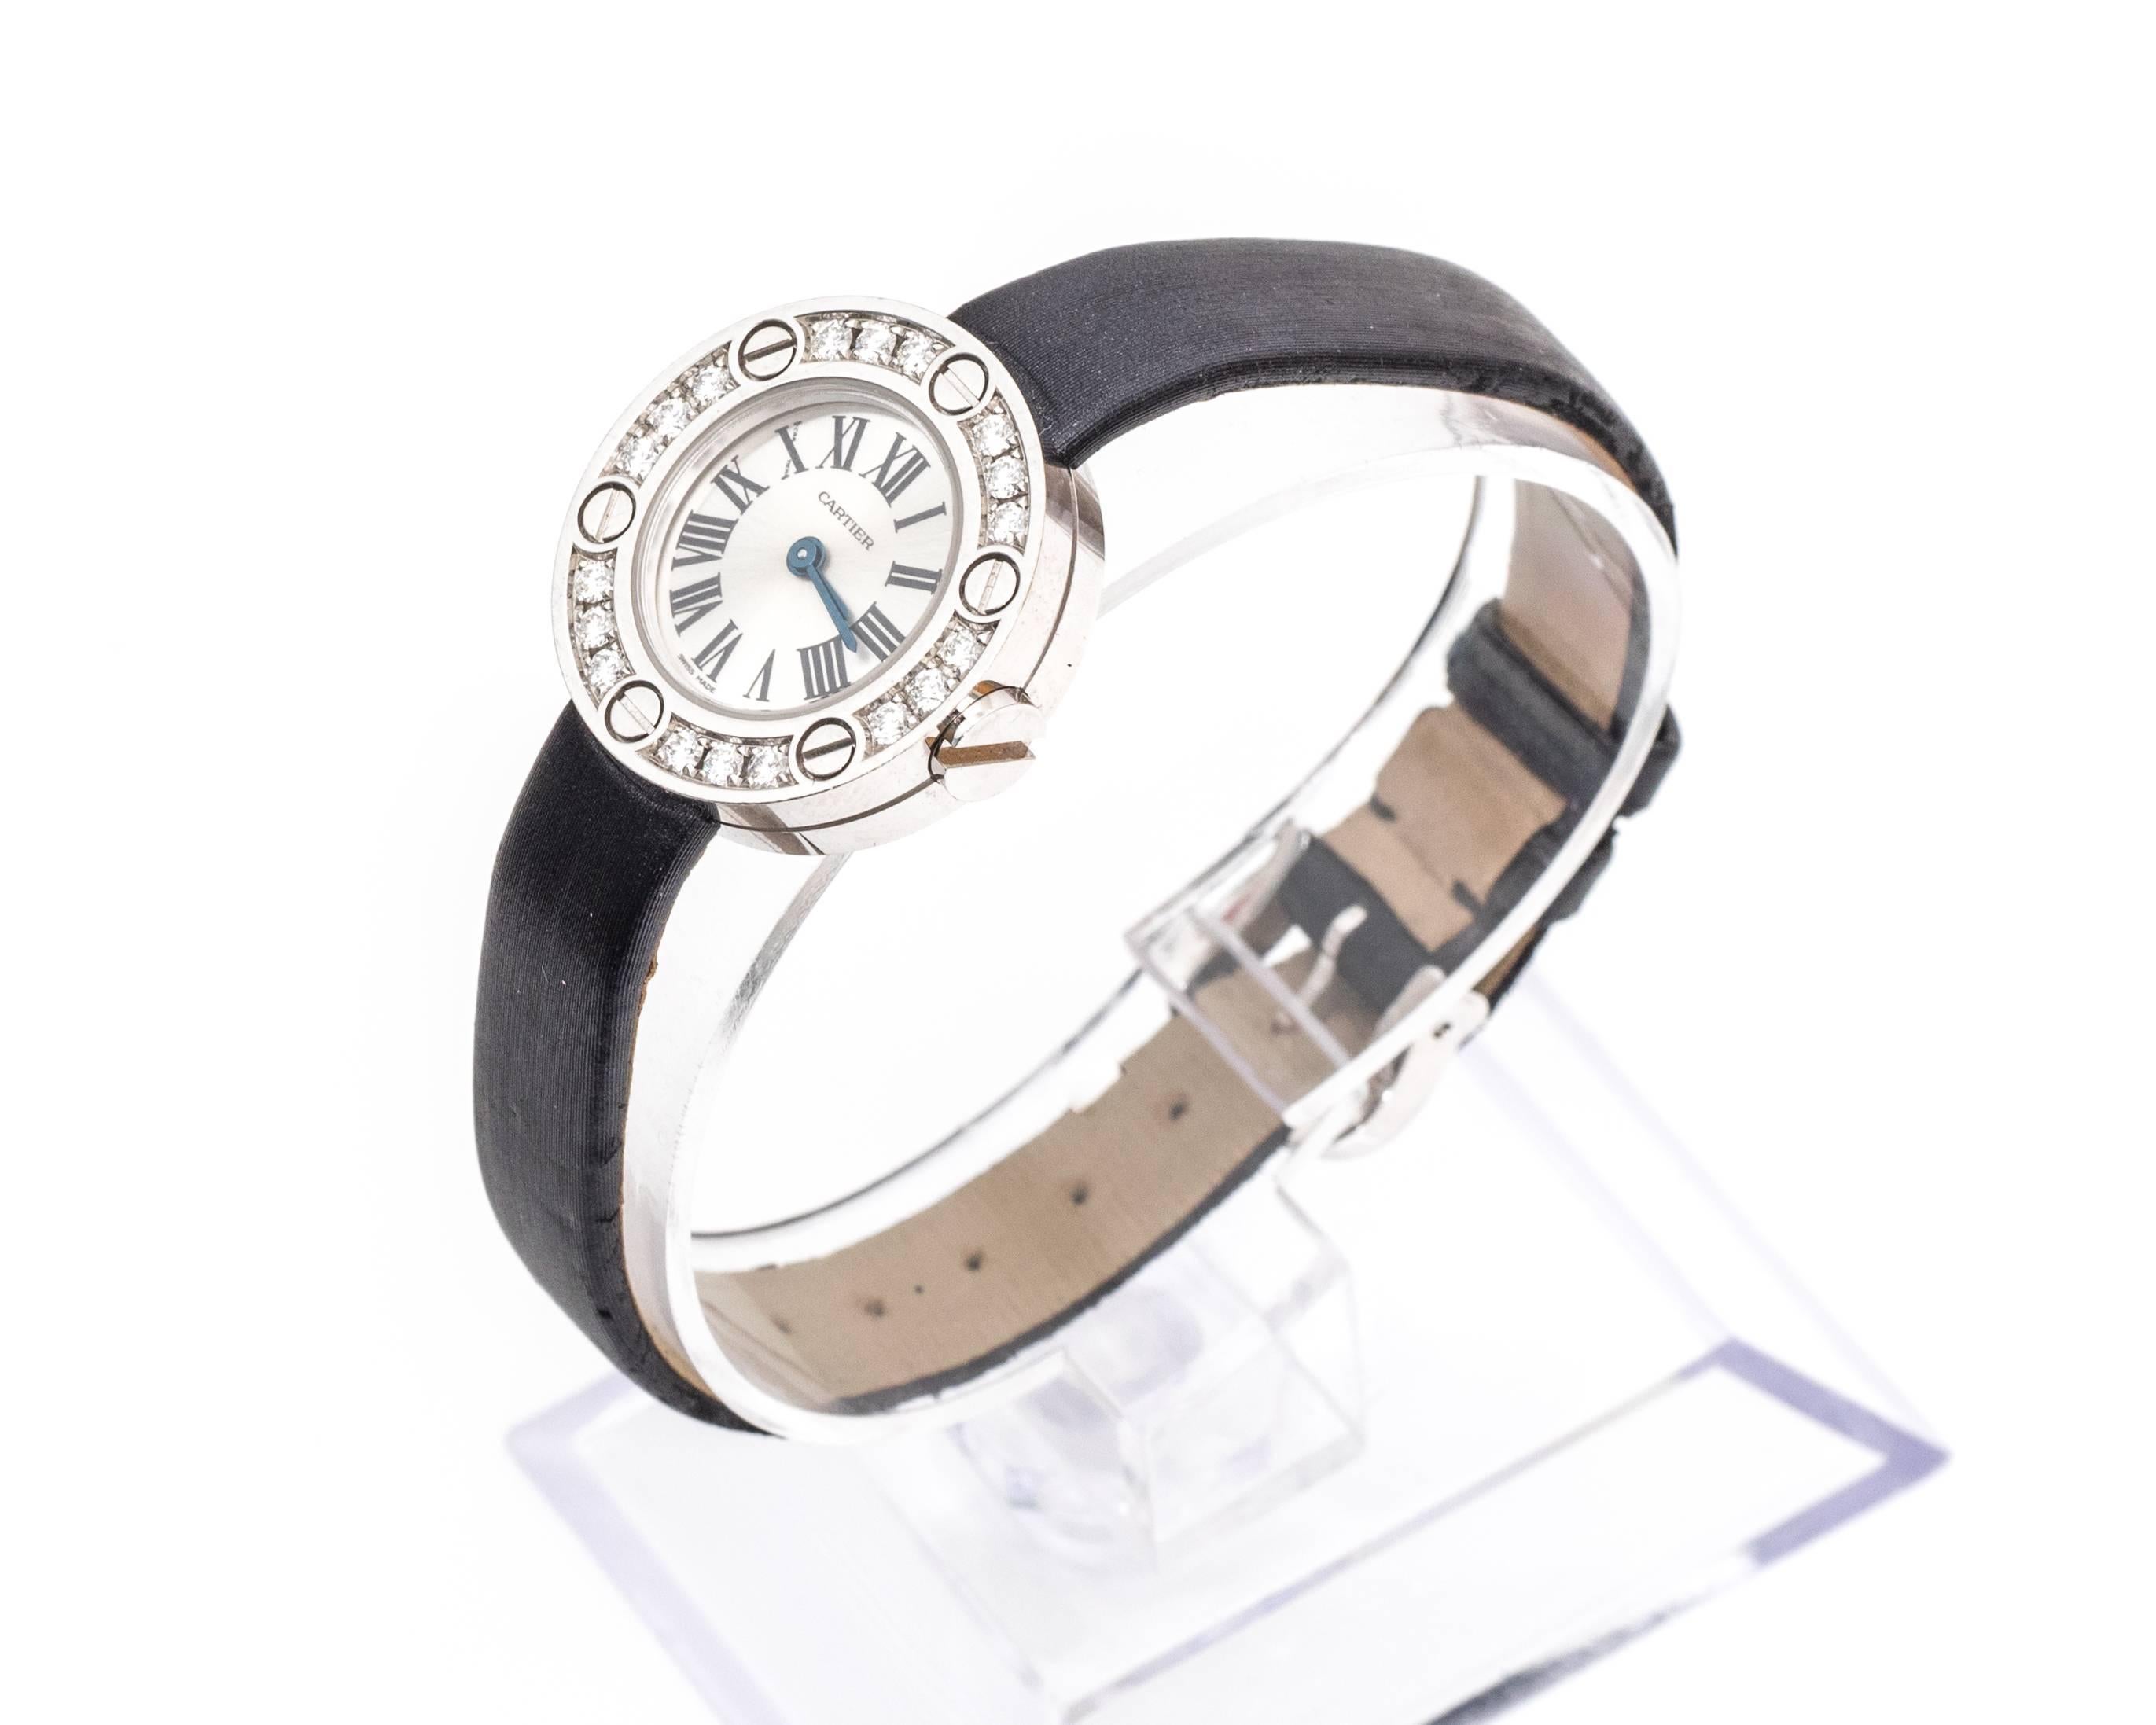 Cartier Wristwatch, part of the Love series
18 Karat Gold and Diamonds
Black Leather Strap (condition is mint, and can be replaced to a new strap) 
Model Number WE800331
Features 18 Diamonds along Frame of Dial with Cartier logo separating each